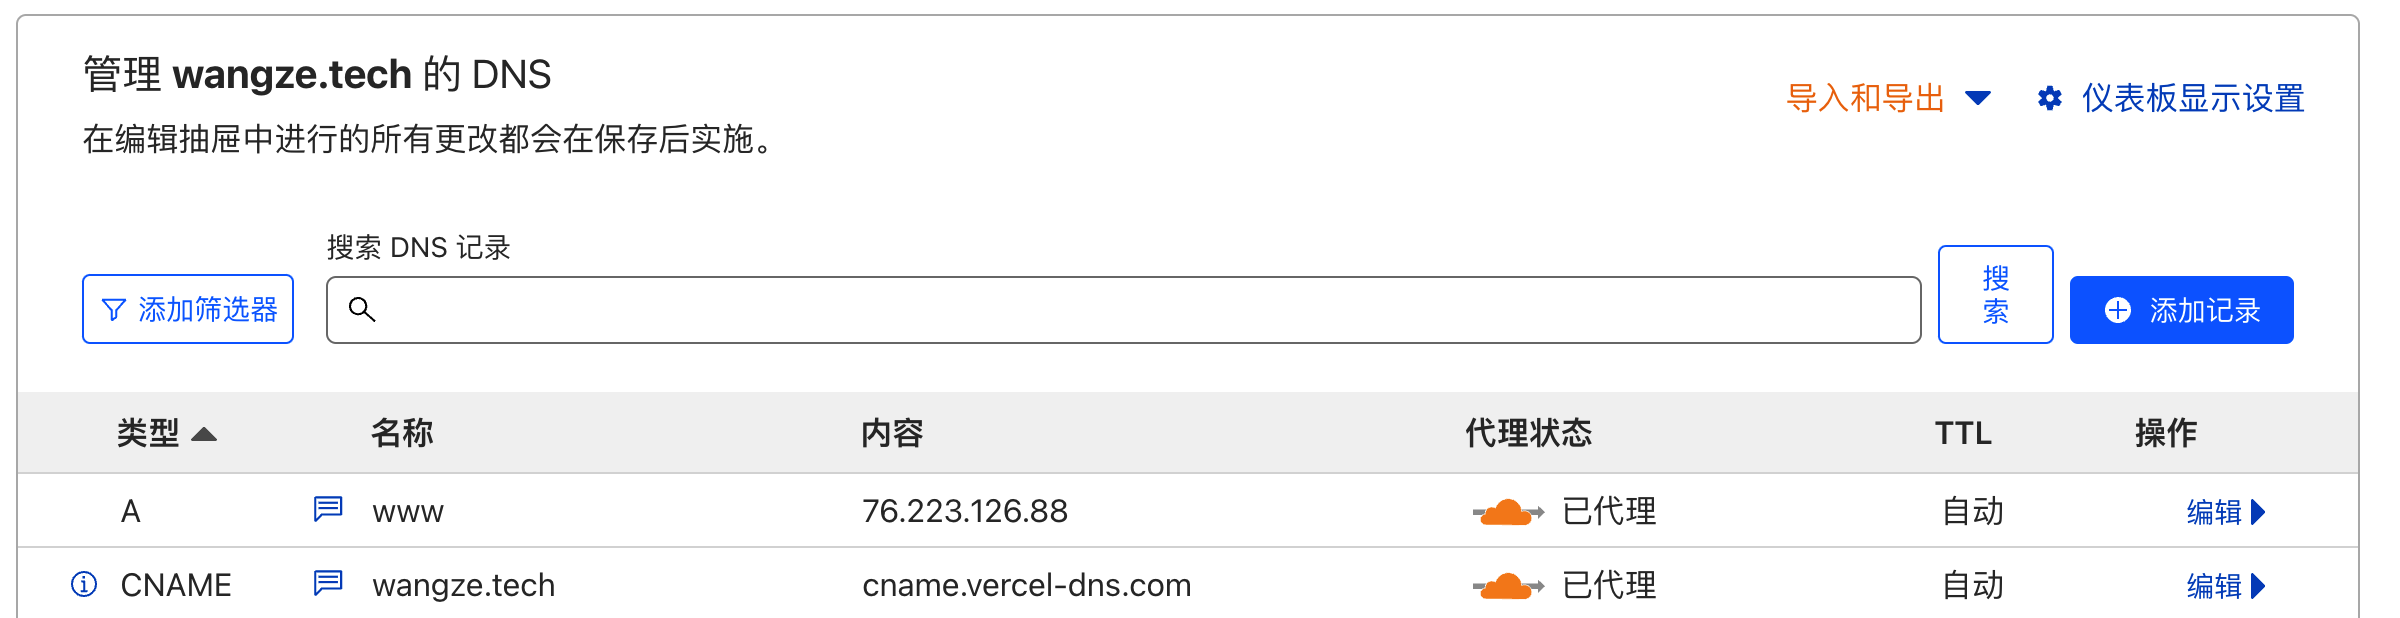 custom-domains-cloudflare.png